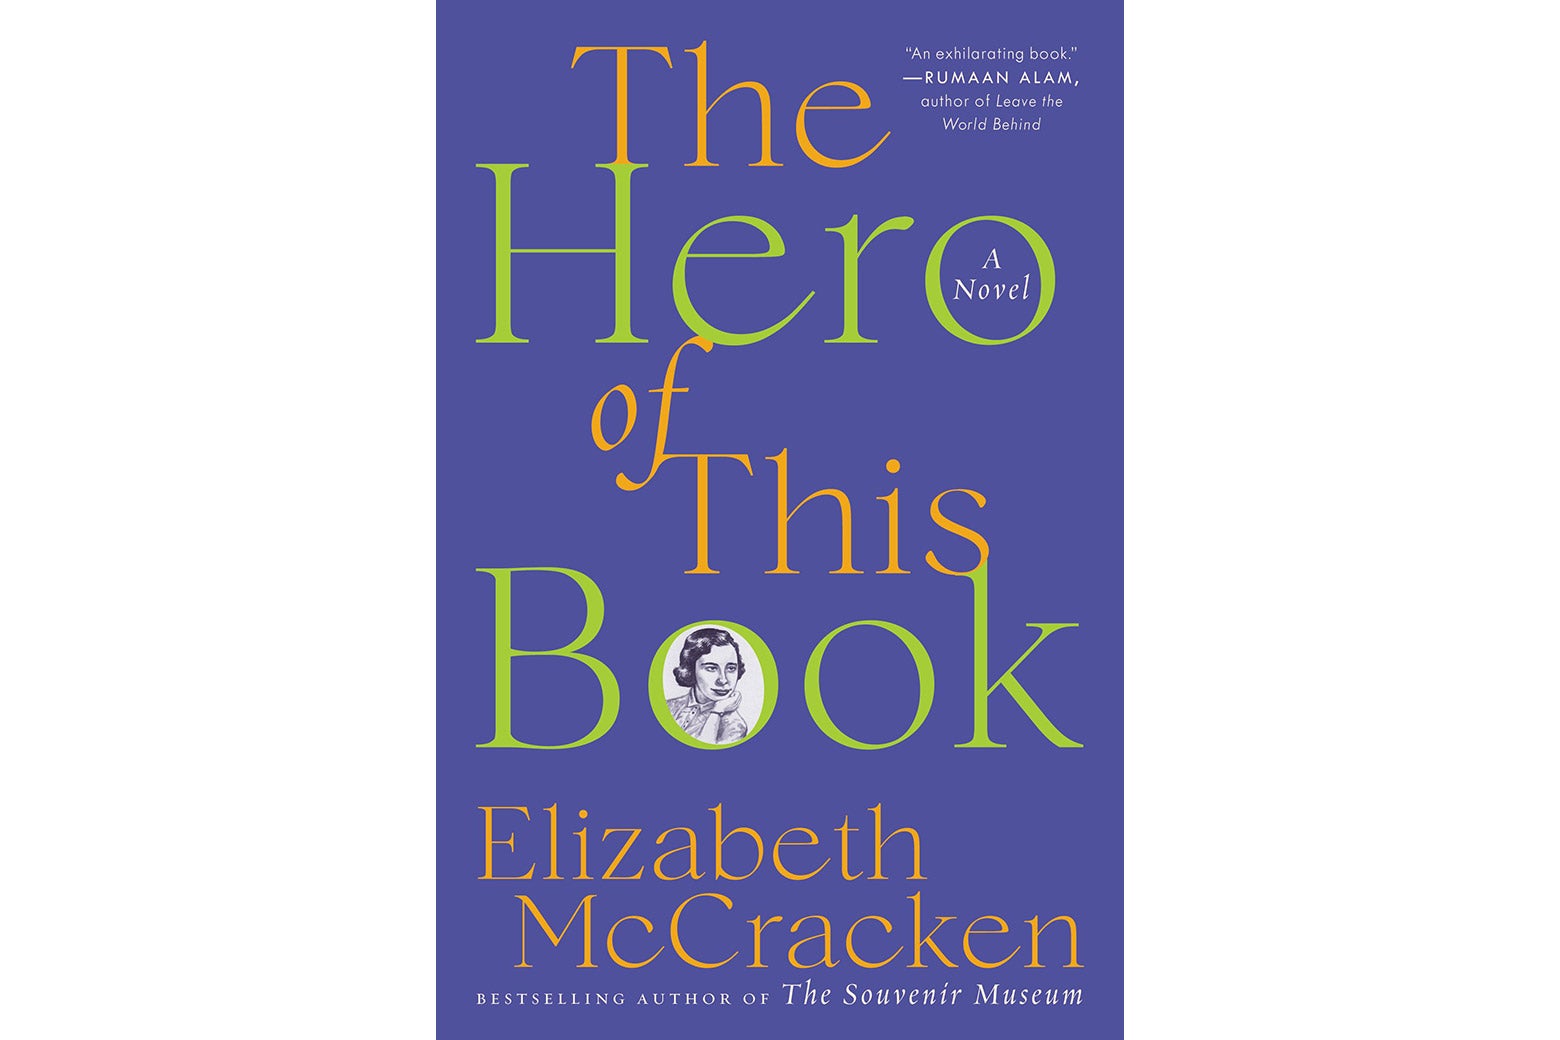 The cover of The Hero of This Book features the title and a very small drawing of the author's mother on a purple field.